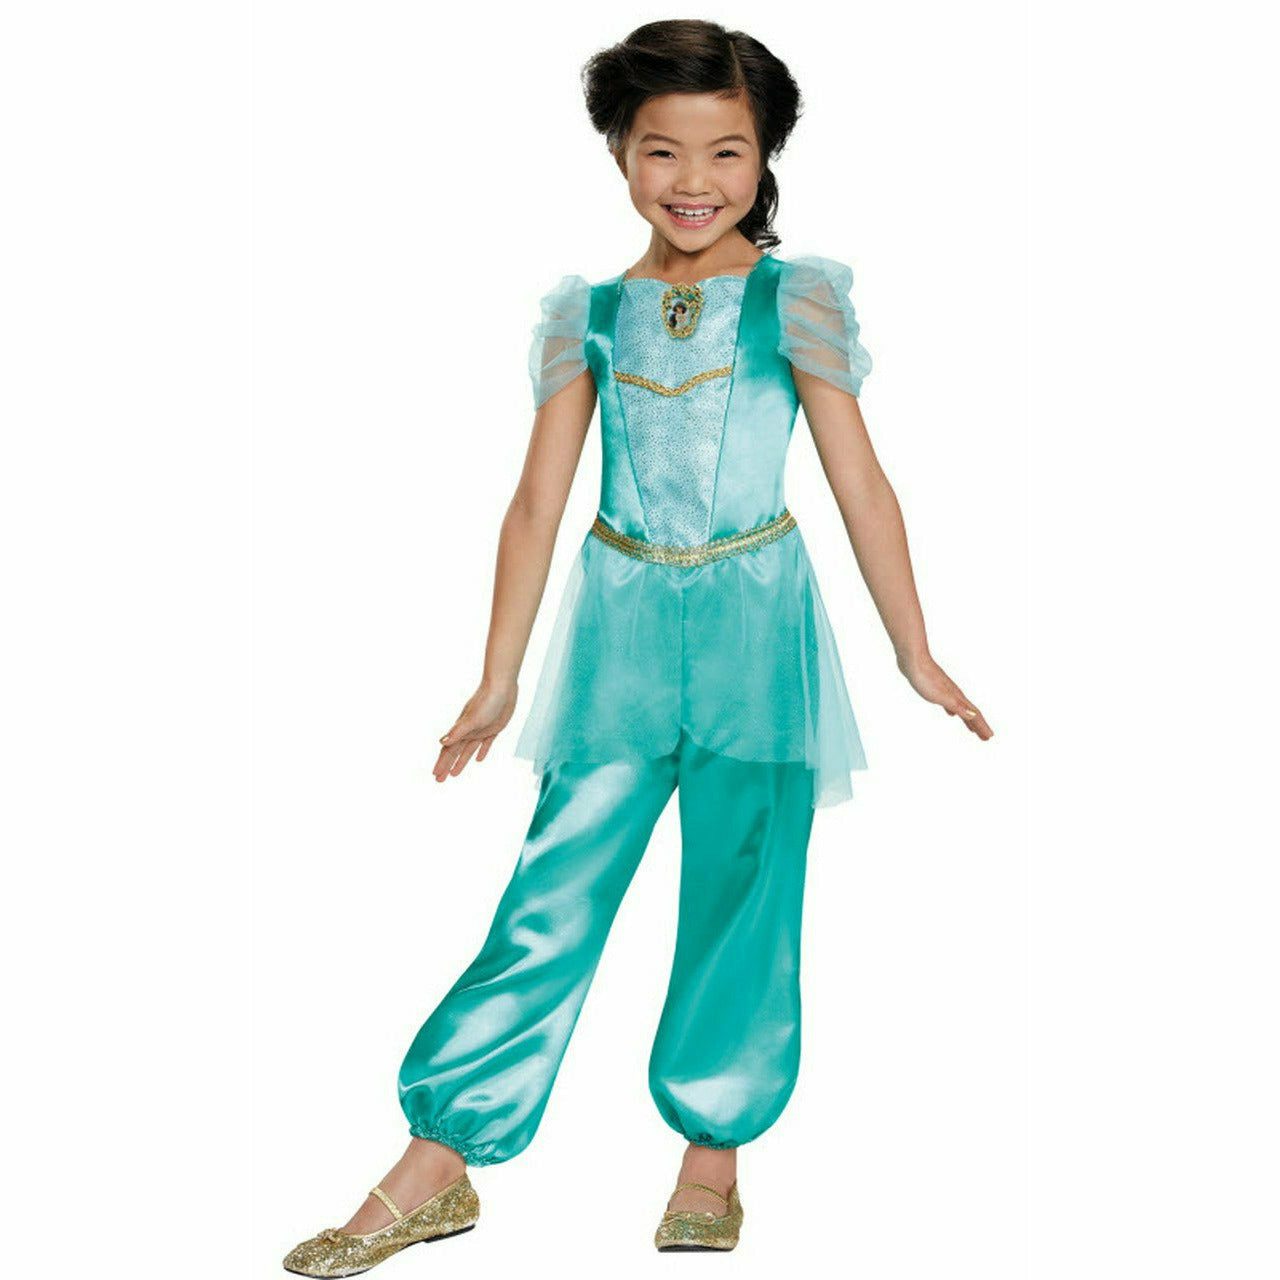 Ultimate Party Super Stores COSTUMES 3T-4T(XS) Girls Jasmine Classic Child Halloween Costume - Aladdin